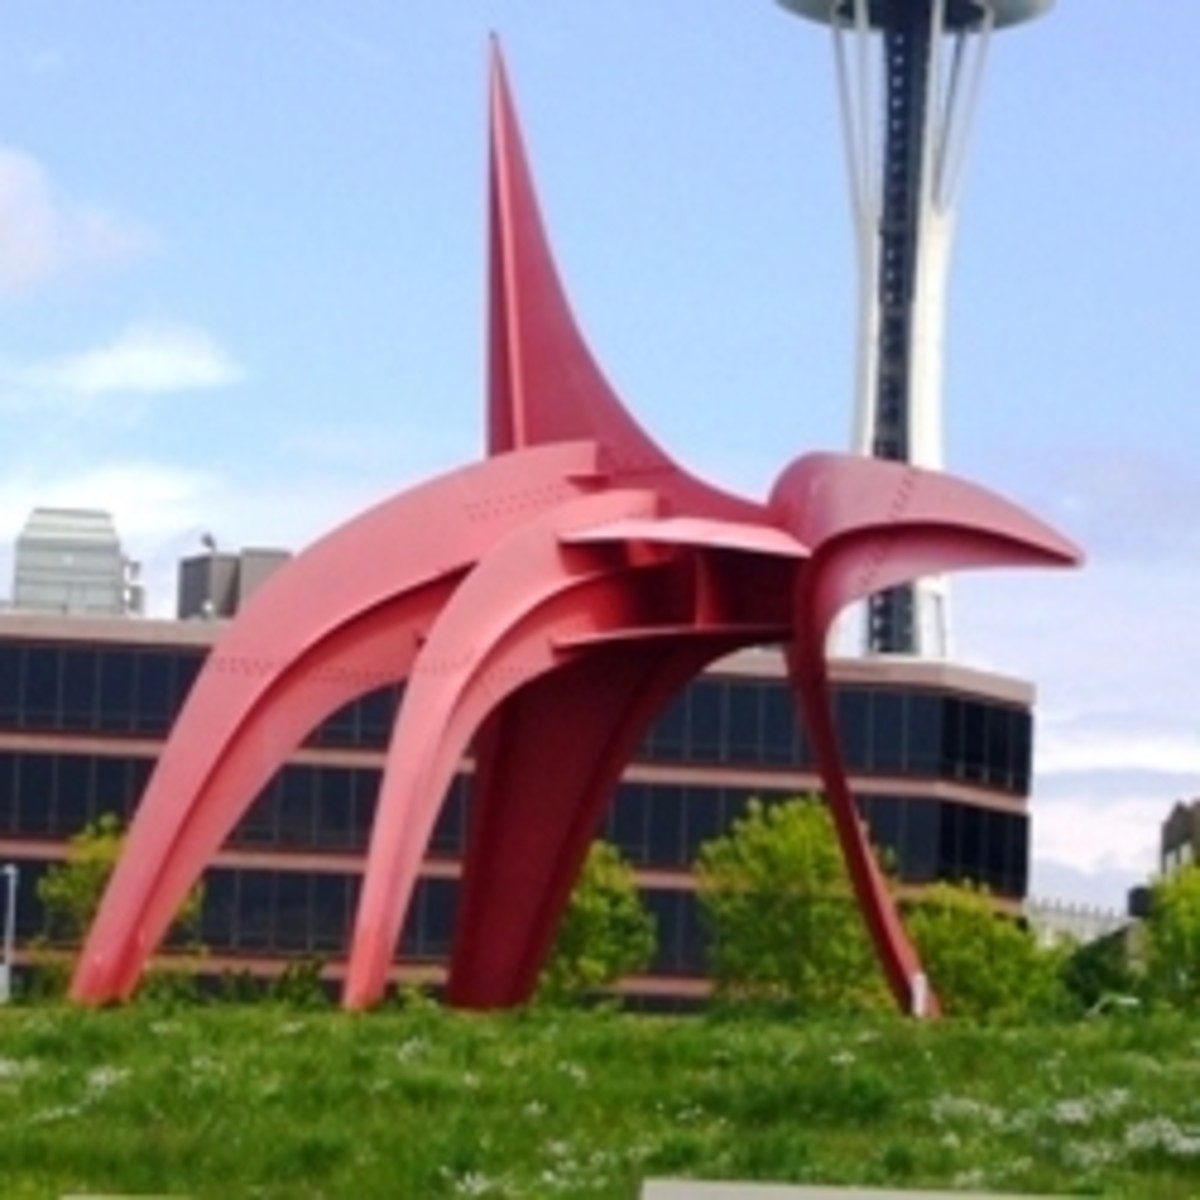 "Eagle"  Sculpture with the Space Needle in the Background